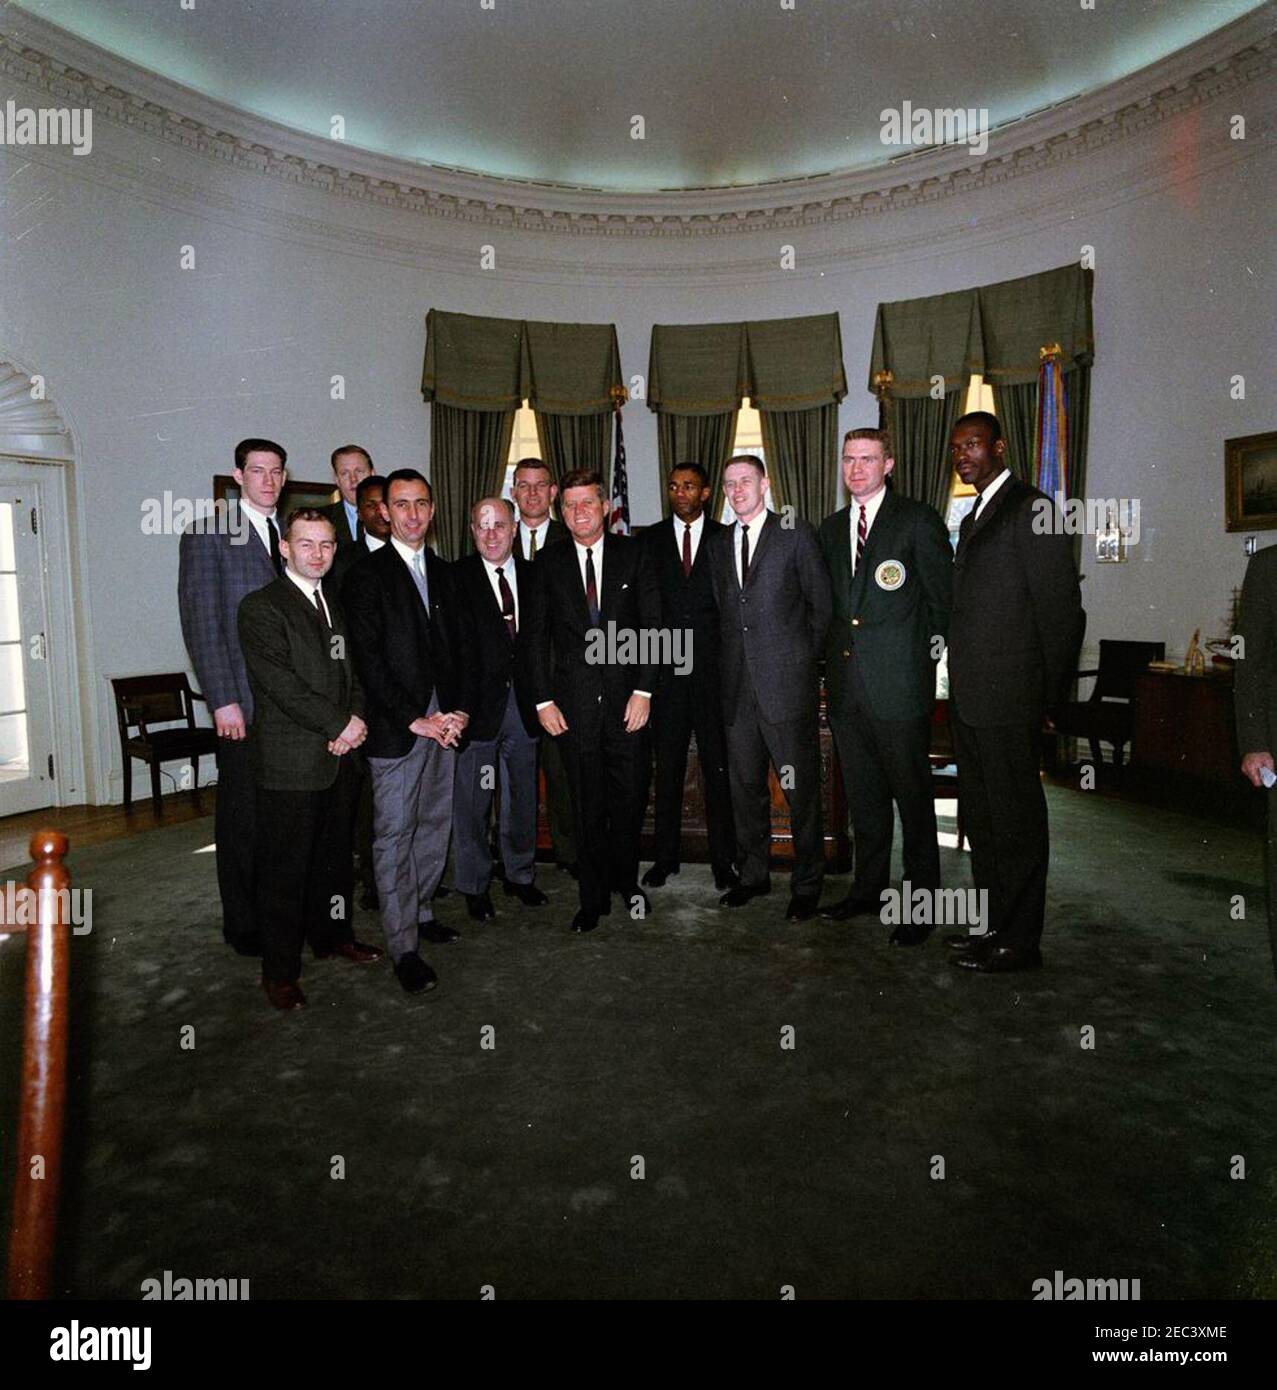 Visit of the Boston Celtics basketball team, 1:00PM. Members of the  National Basketball Association (NBA) Boston Celtics team visit with  President John F. Kennedy in the Oval Office during a tour of